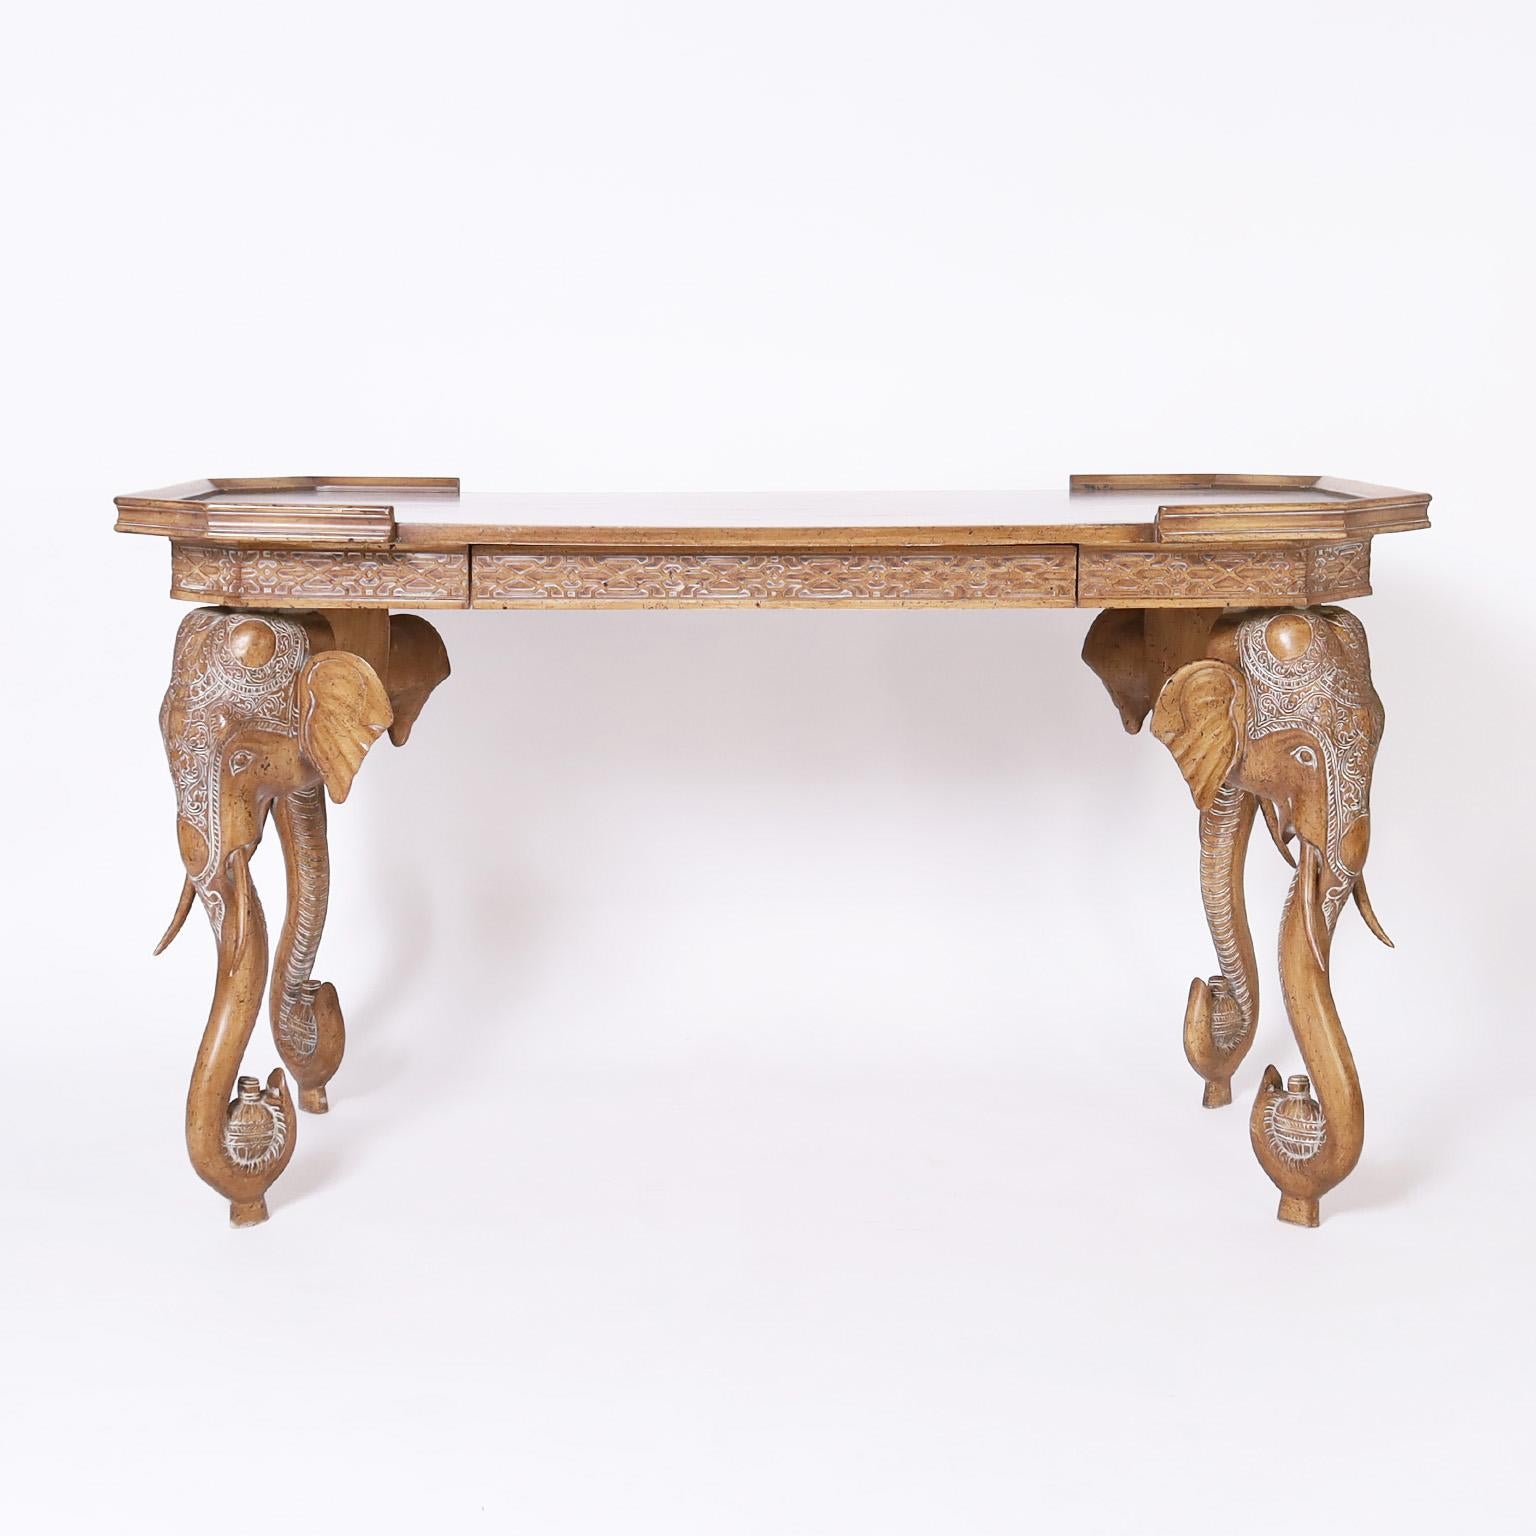 British colonial style one drawer writing desk or table crafted in walnut with a chic pecan finish with contrived aging and featuring four carved elephant head legs with an India inspired motif.